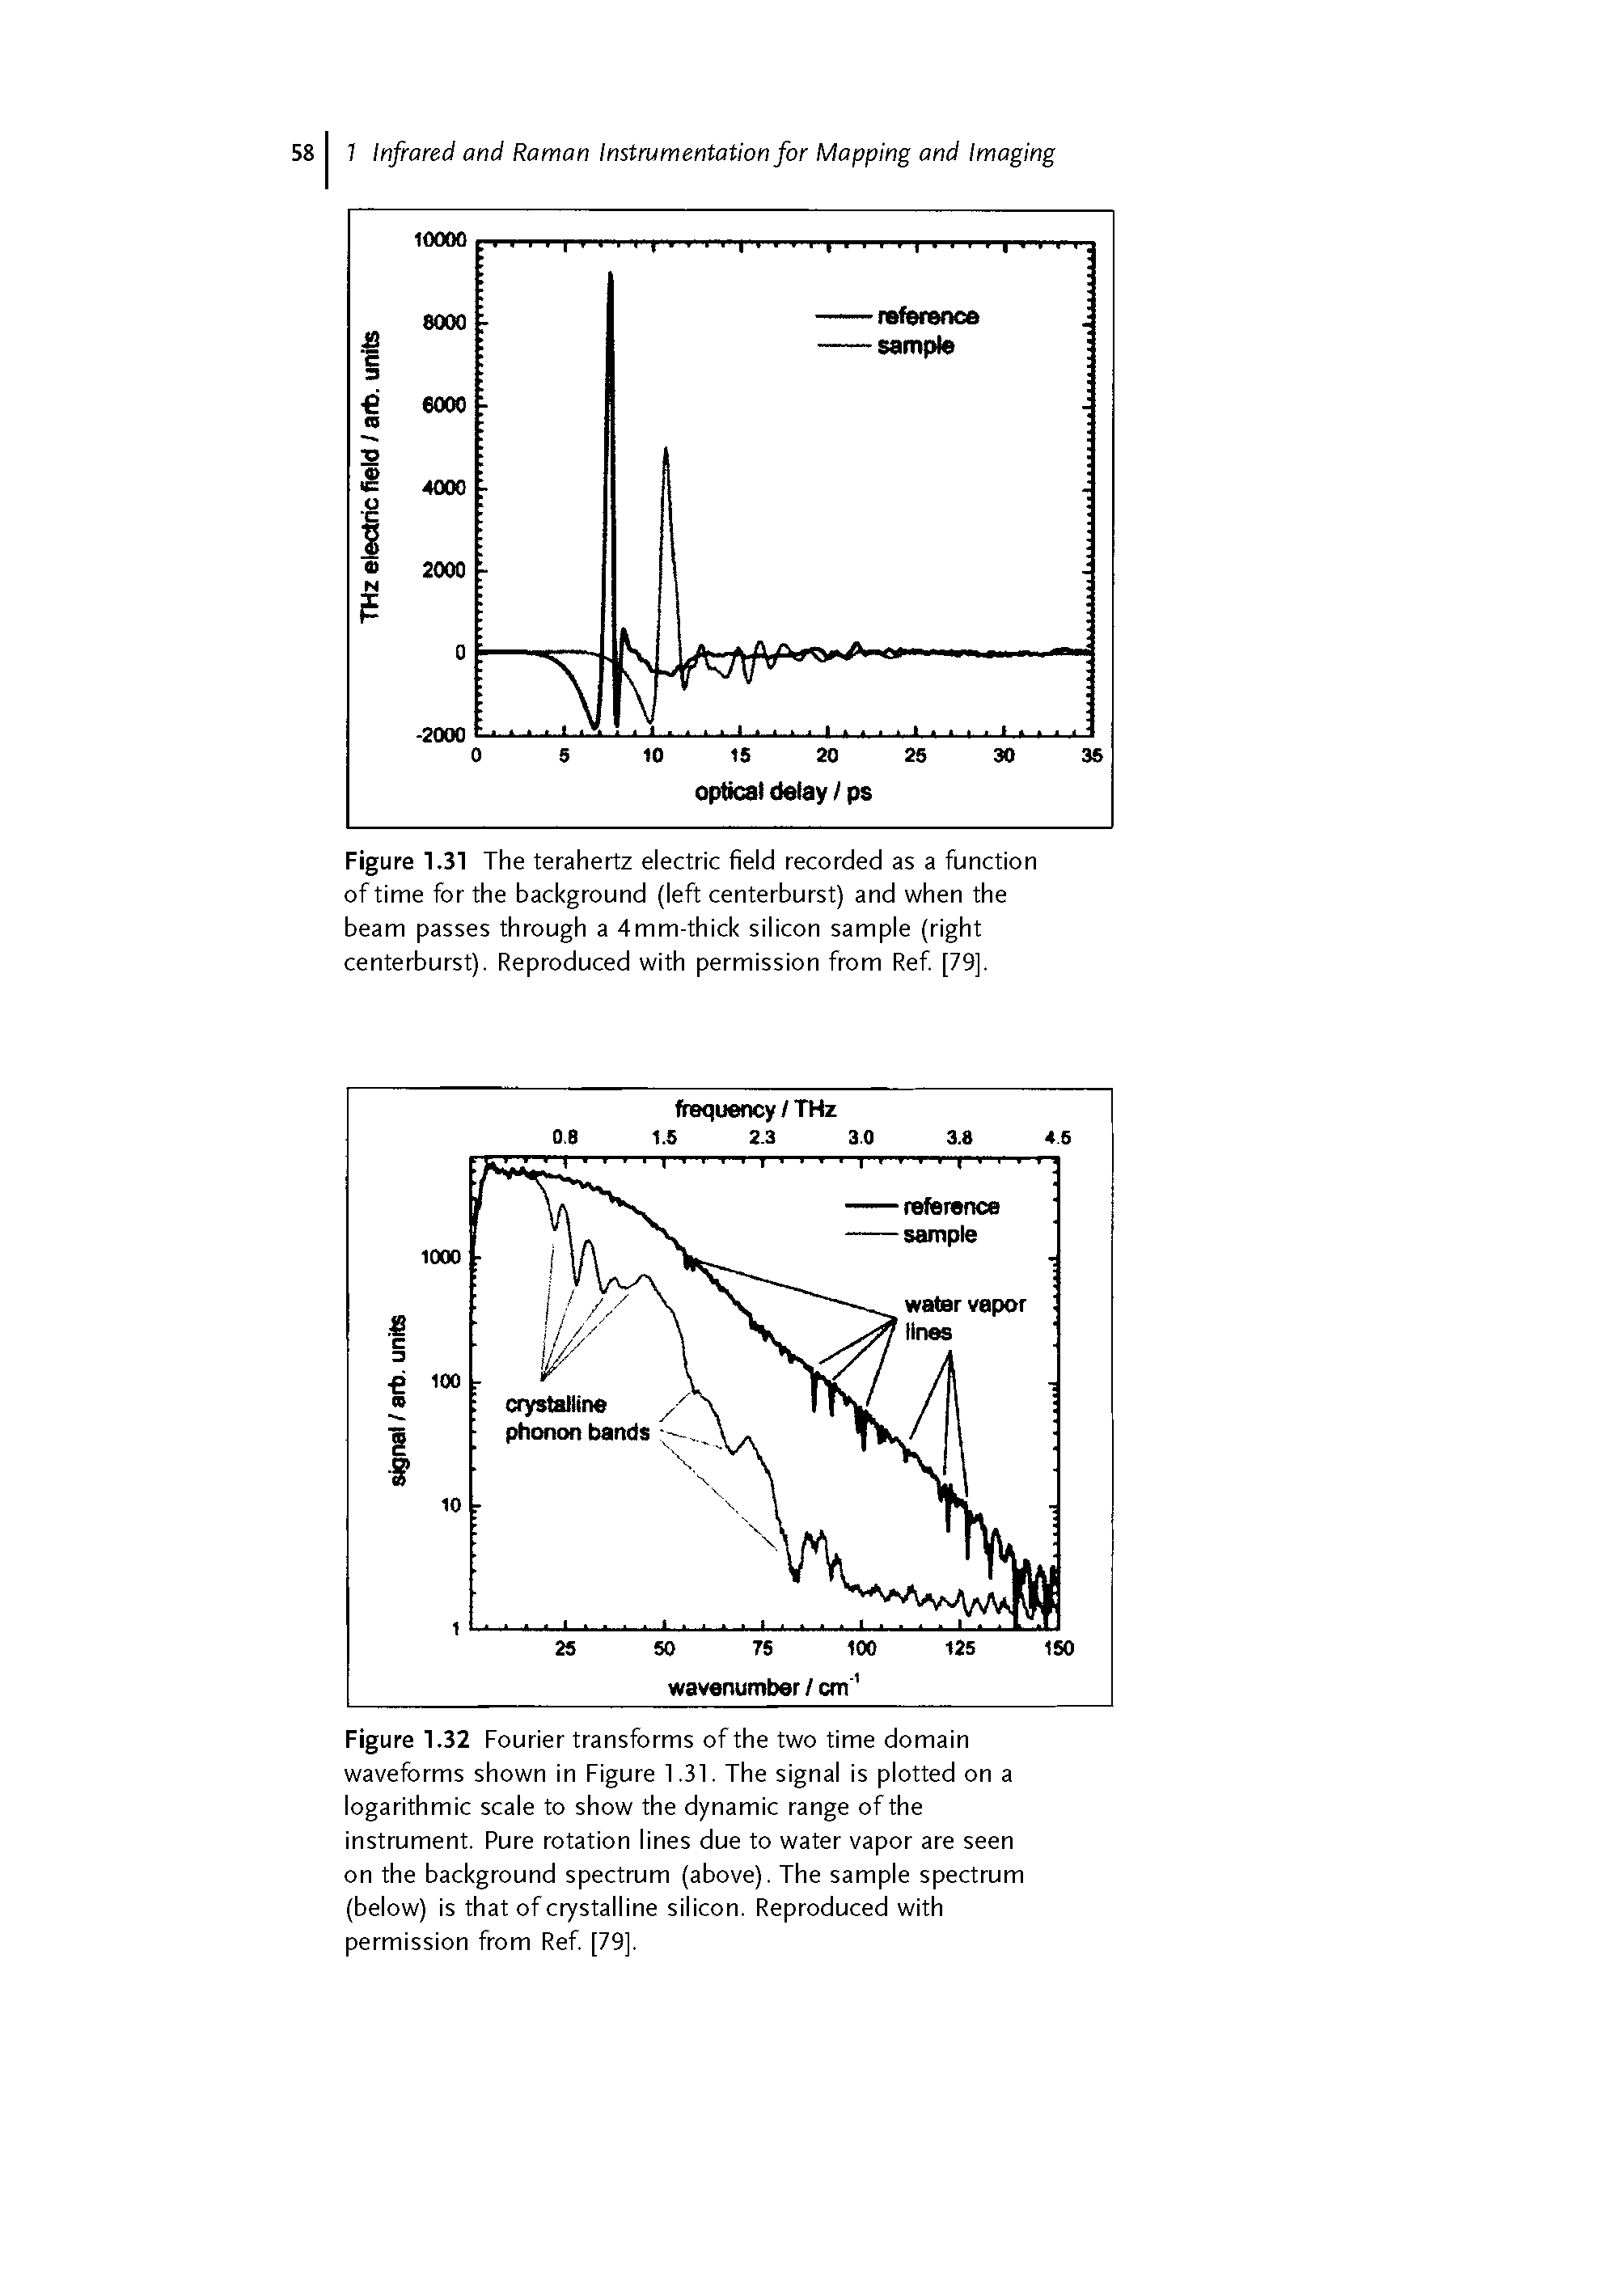 Figure 1.32 Fourier transforms of the two time domain waveforms shown in Figure 1.31. The signal is plotted on a logarithmic scale to show the dynamic range of the instrument. Pure rotation lines due to water vapor are seen on the background spectrum (above). The sample spectrum (below) is that of crystalline silicon. Reproduced with permission from Ref [79].